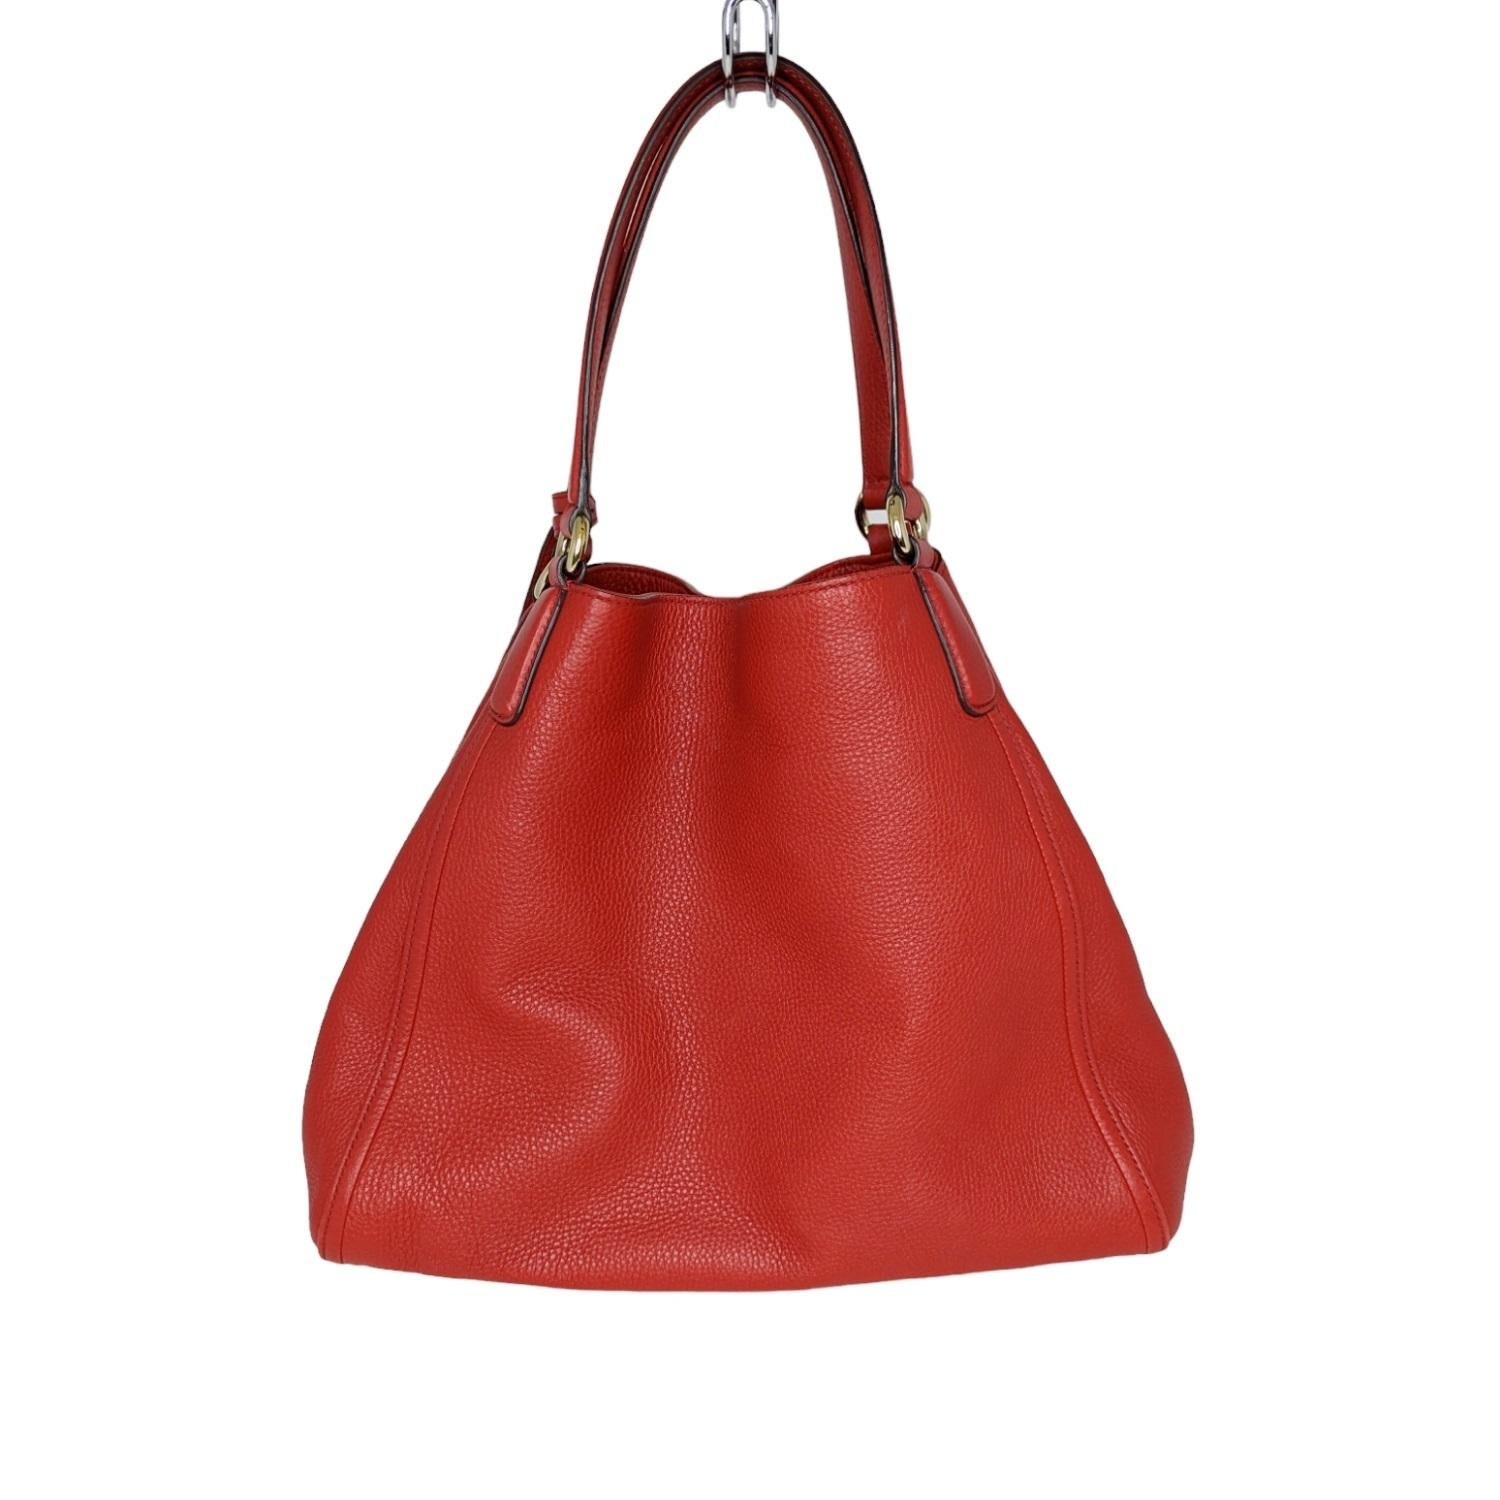 This stylish medium sized tote is crafted of finely textured calfskin leather in red with a quilted interlocking G logo on the front. The handbag features leather strap handles with polished brass links, an open top with ban clasp, and a beige